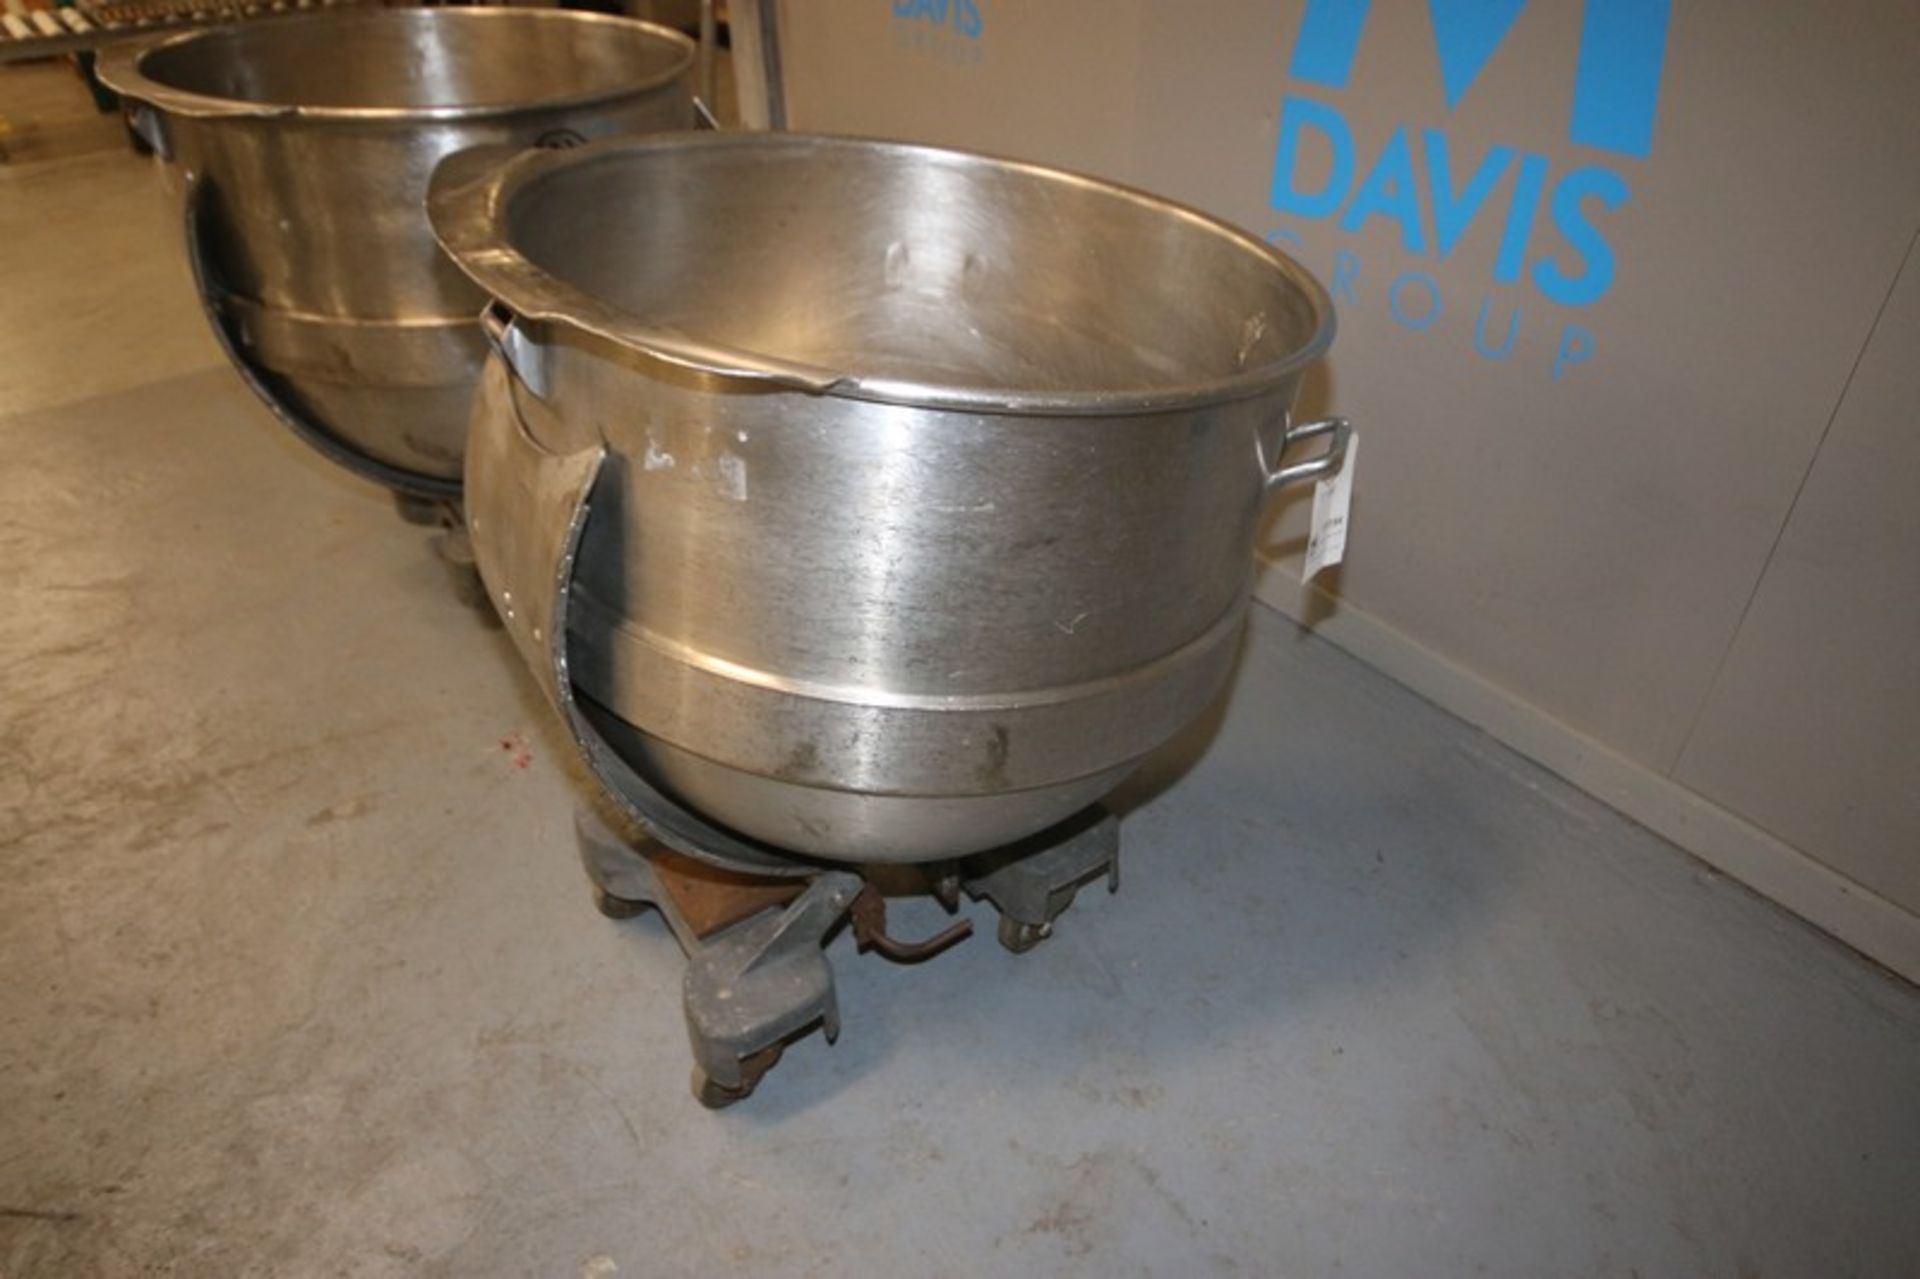 S/S Mixing Bowl, Internal Dims.:  Aprox. 32-1/2" Dia. x 26-1/2" Deep, Mounted on Portable Cart ( - Image 3 of 7